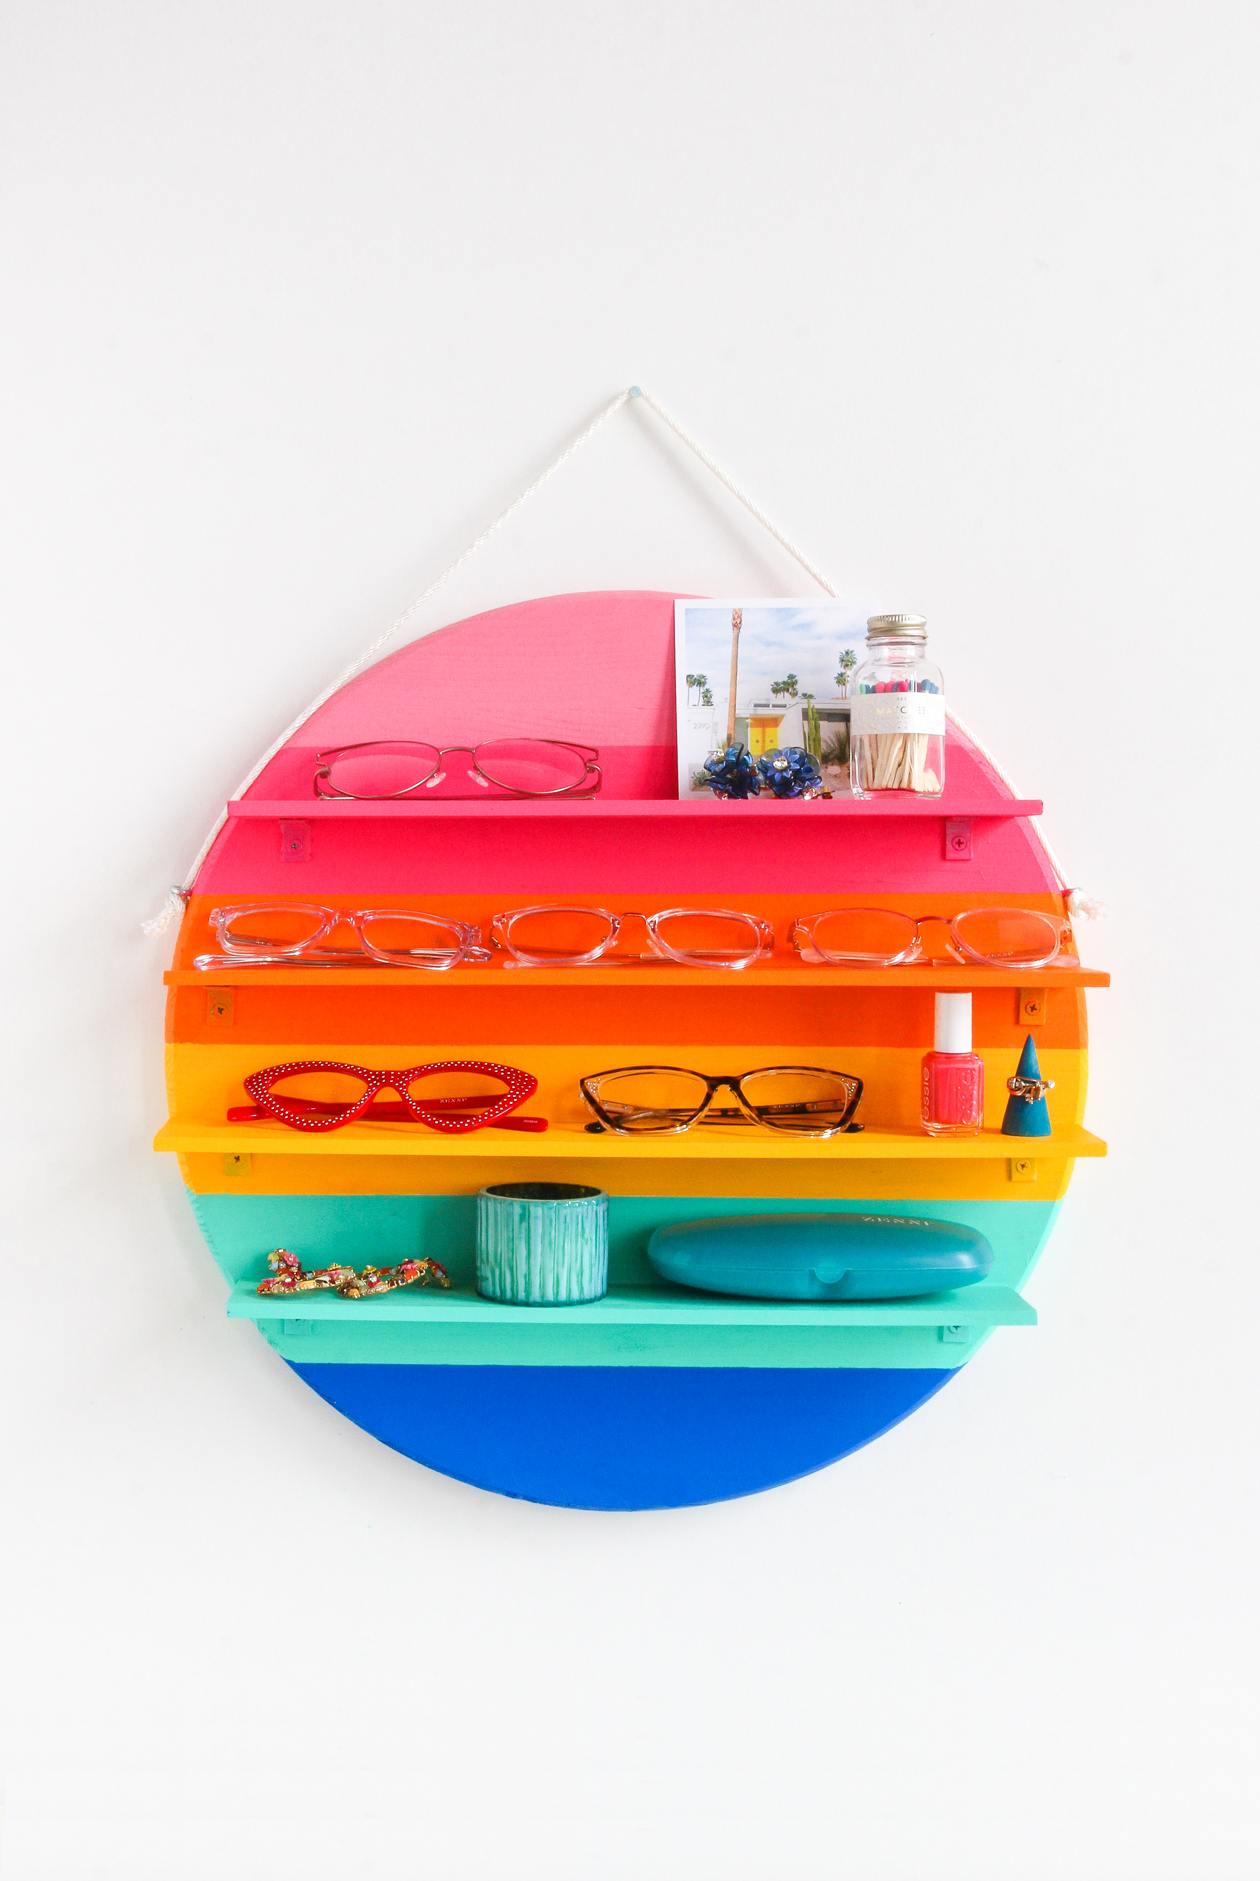 Add color to your storage with this DIY Rainbow Circle Shelf! Great for sunglass storage, nail polish storage, and displaying other small items. This DIY Circle Shelf is the perfect beginner project to get started using power tools.